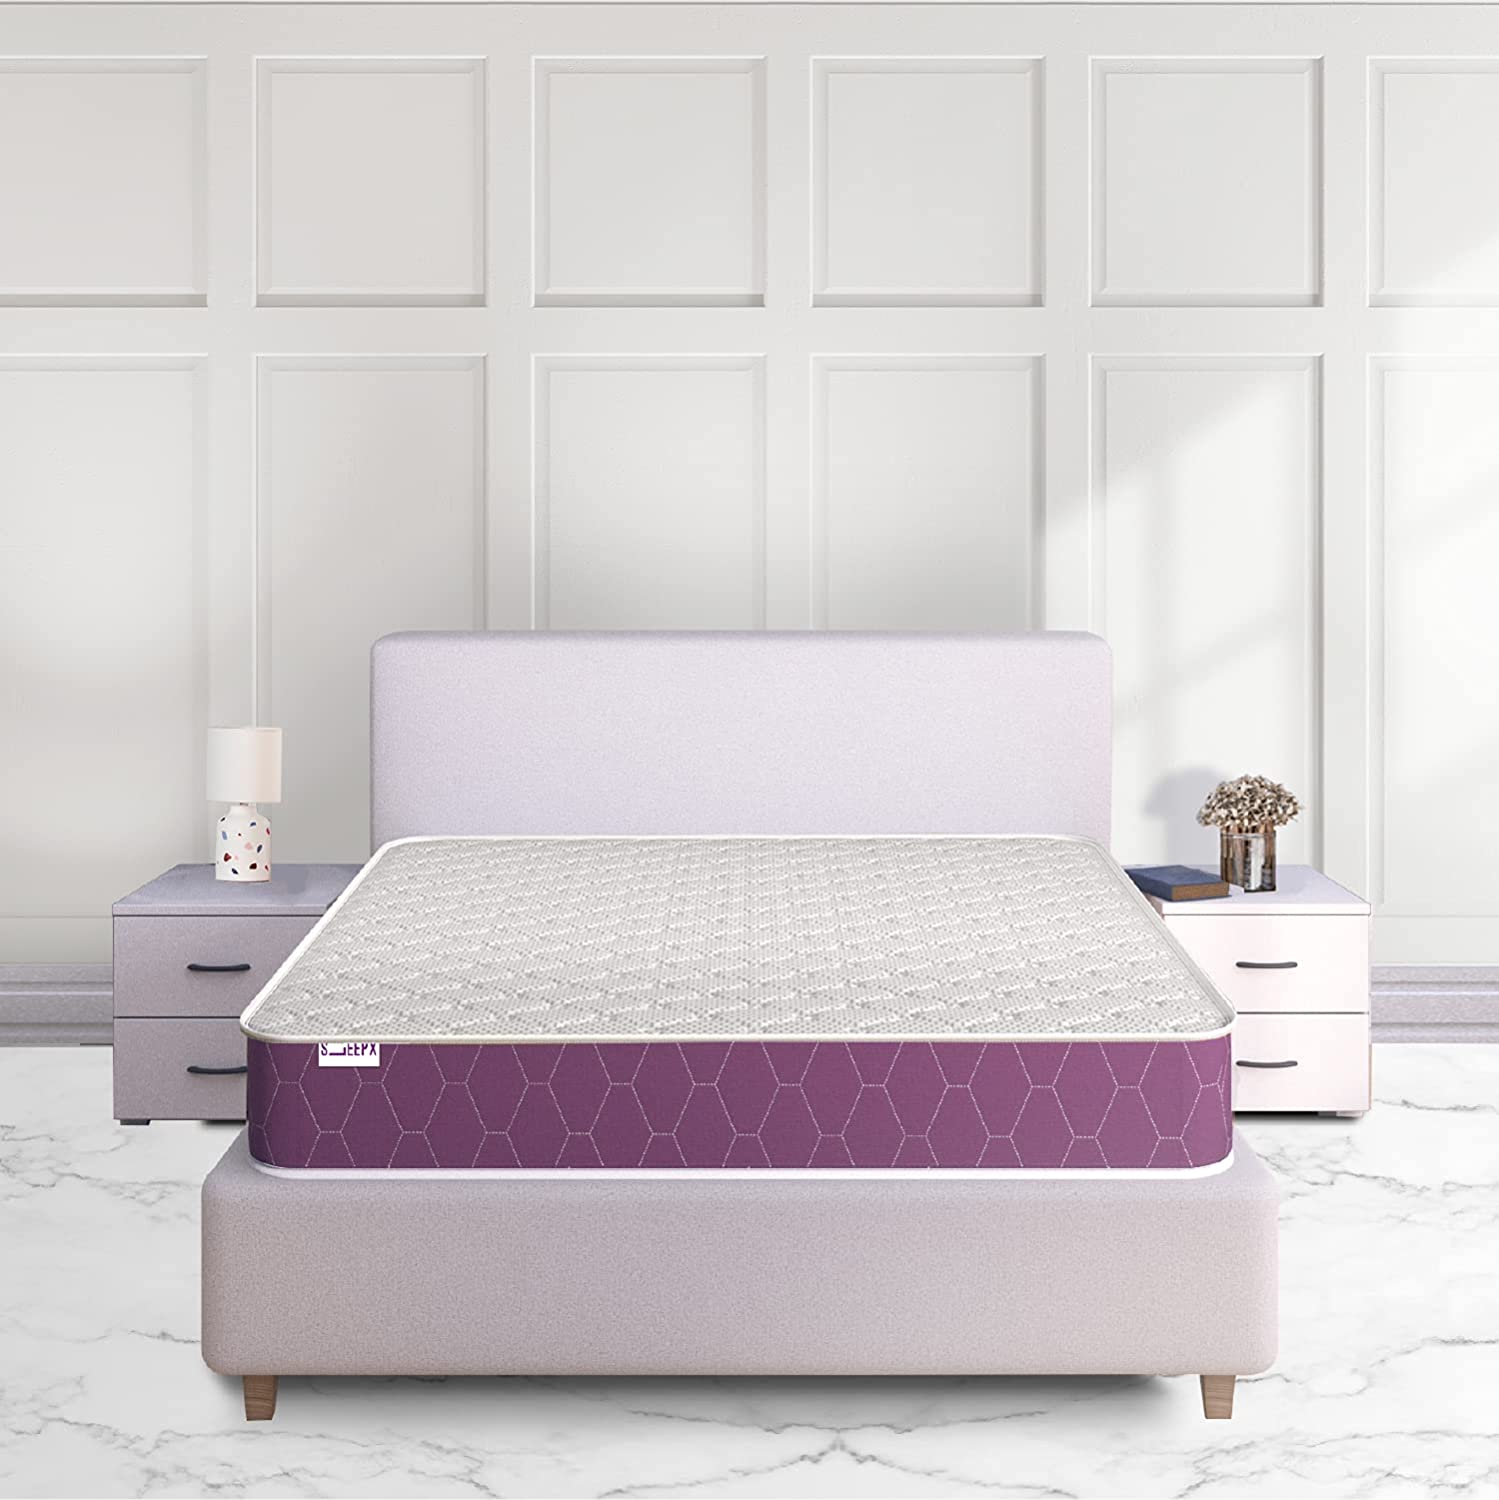 Best Sleepx Ortho Mattress in India